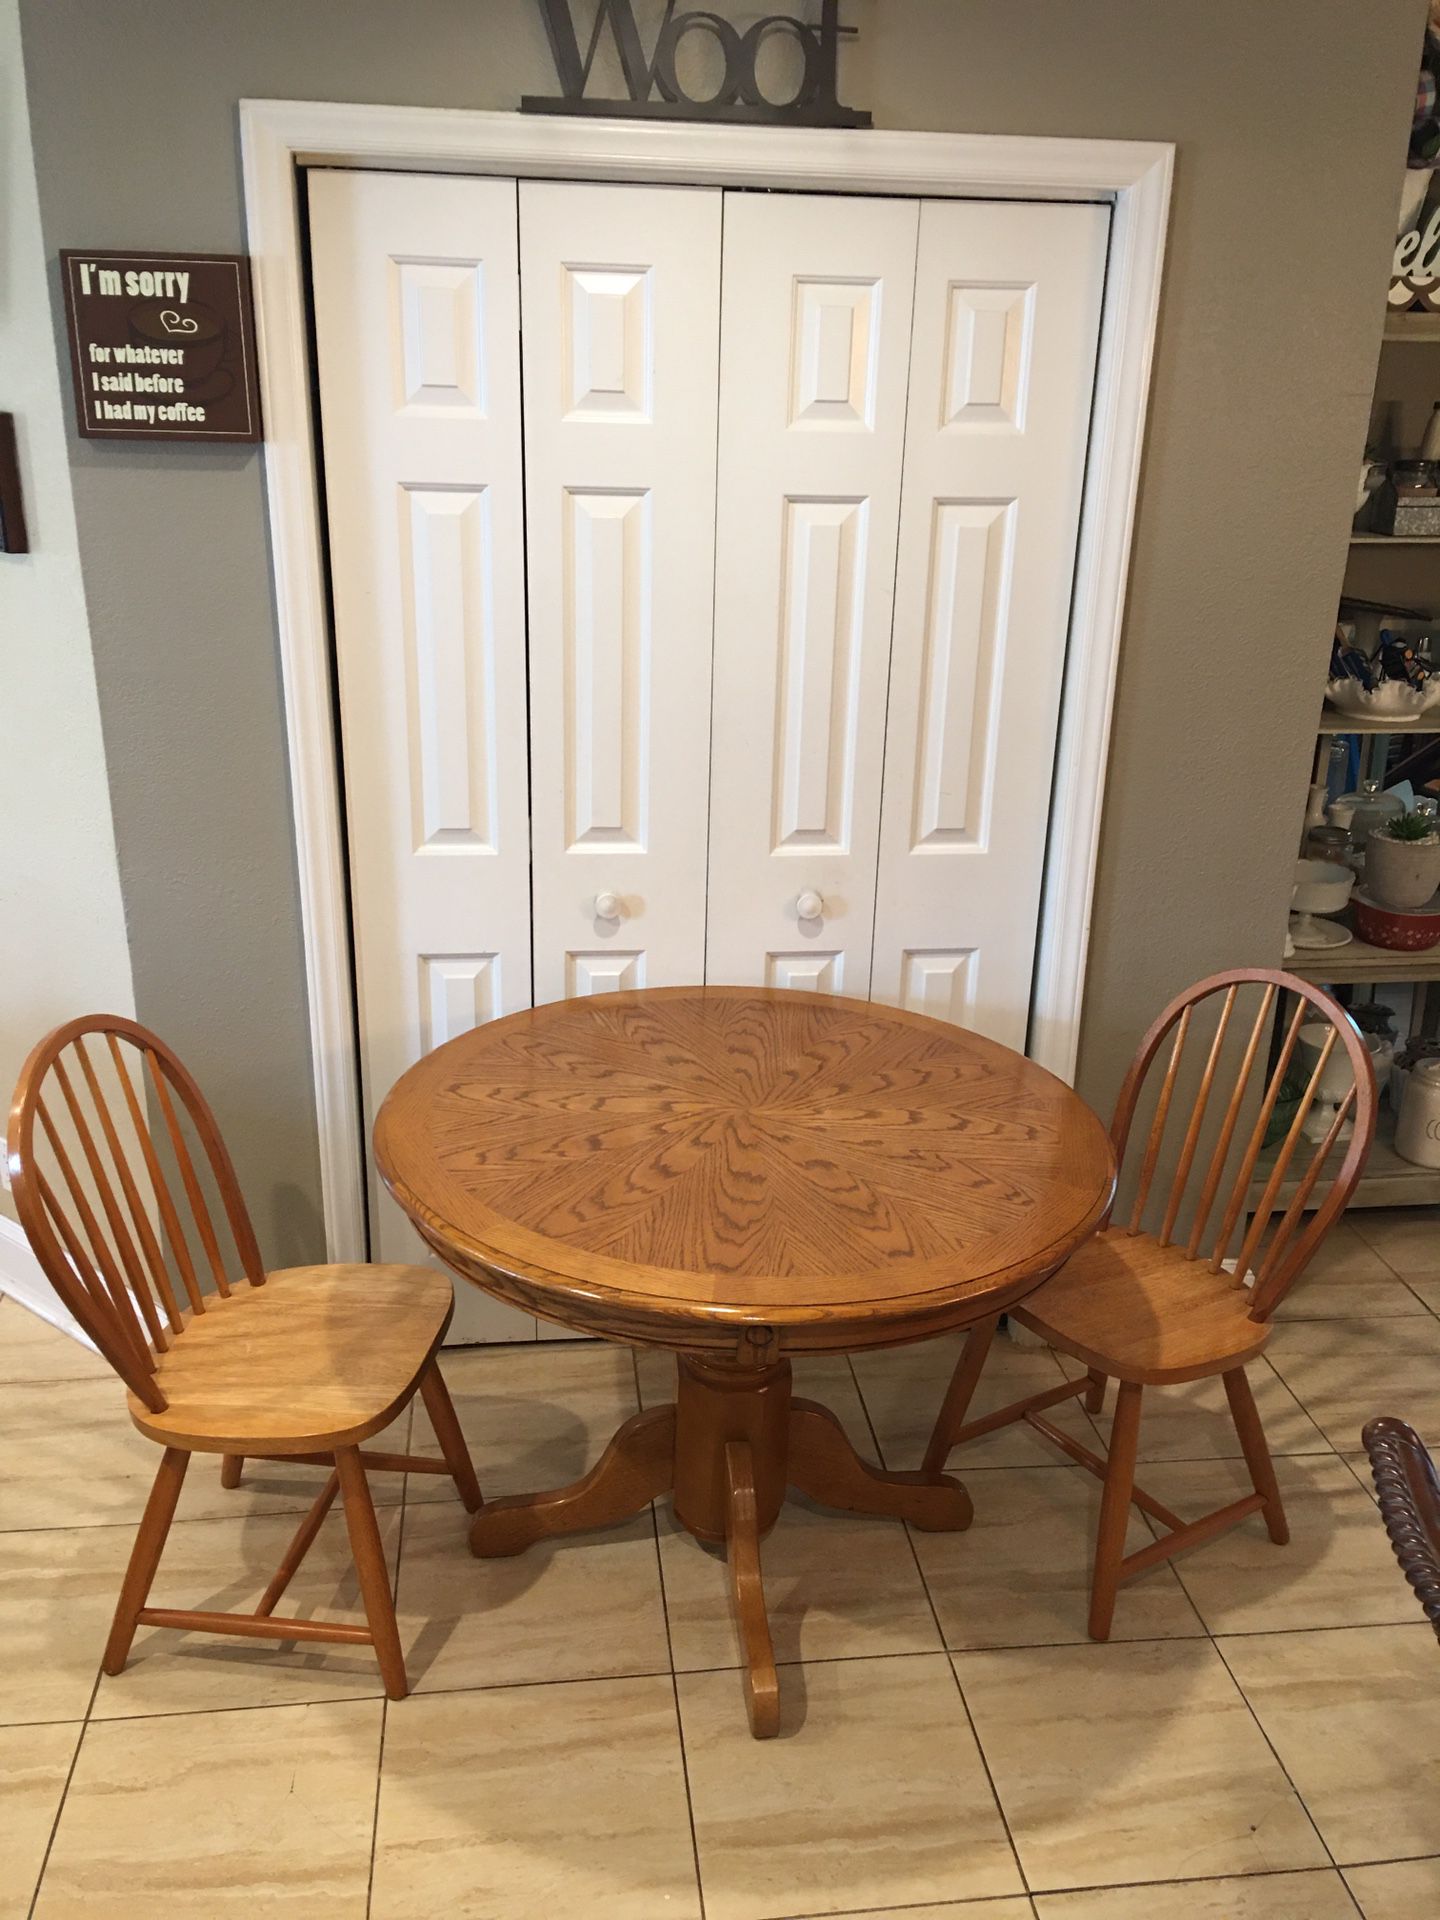 Solid oak table and 2 chairs. Used in good condition. Table size 42” x 42” x 29”